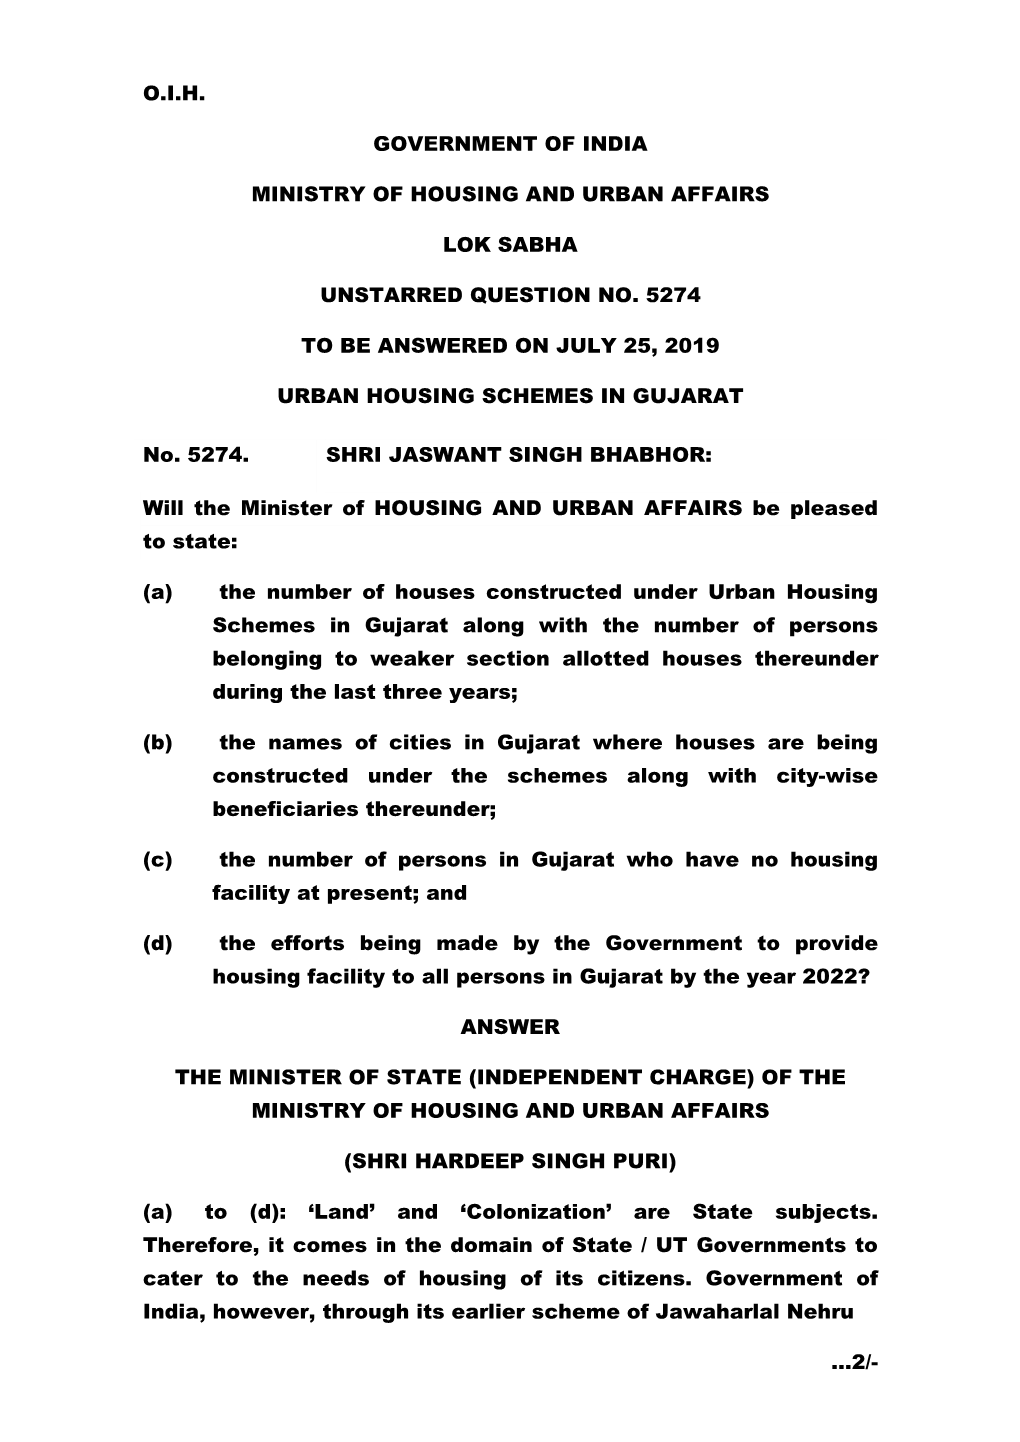 O.I.H. Government of India Ministry of Housing and Urban Affairs Lok Sabha Unstarred Question No. 5274 to Be Answered on July 25